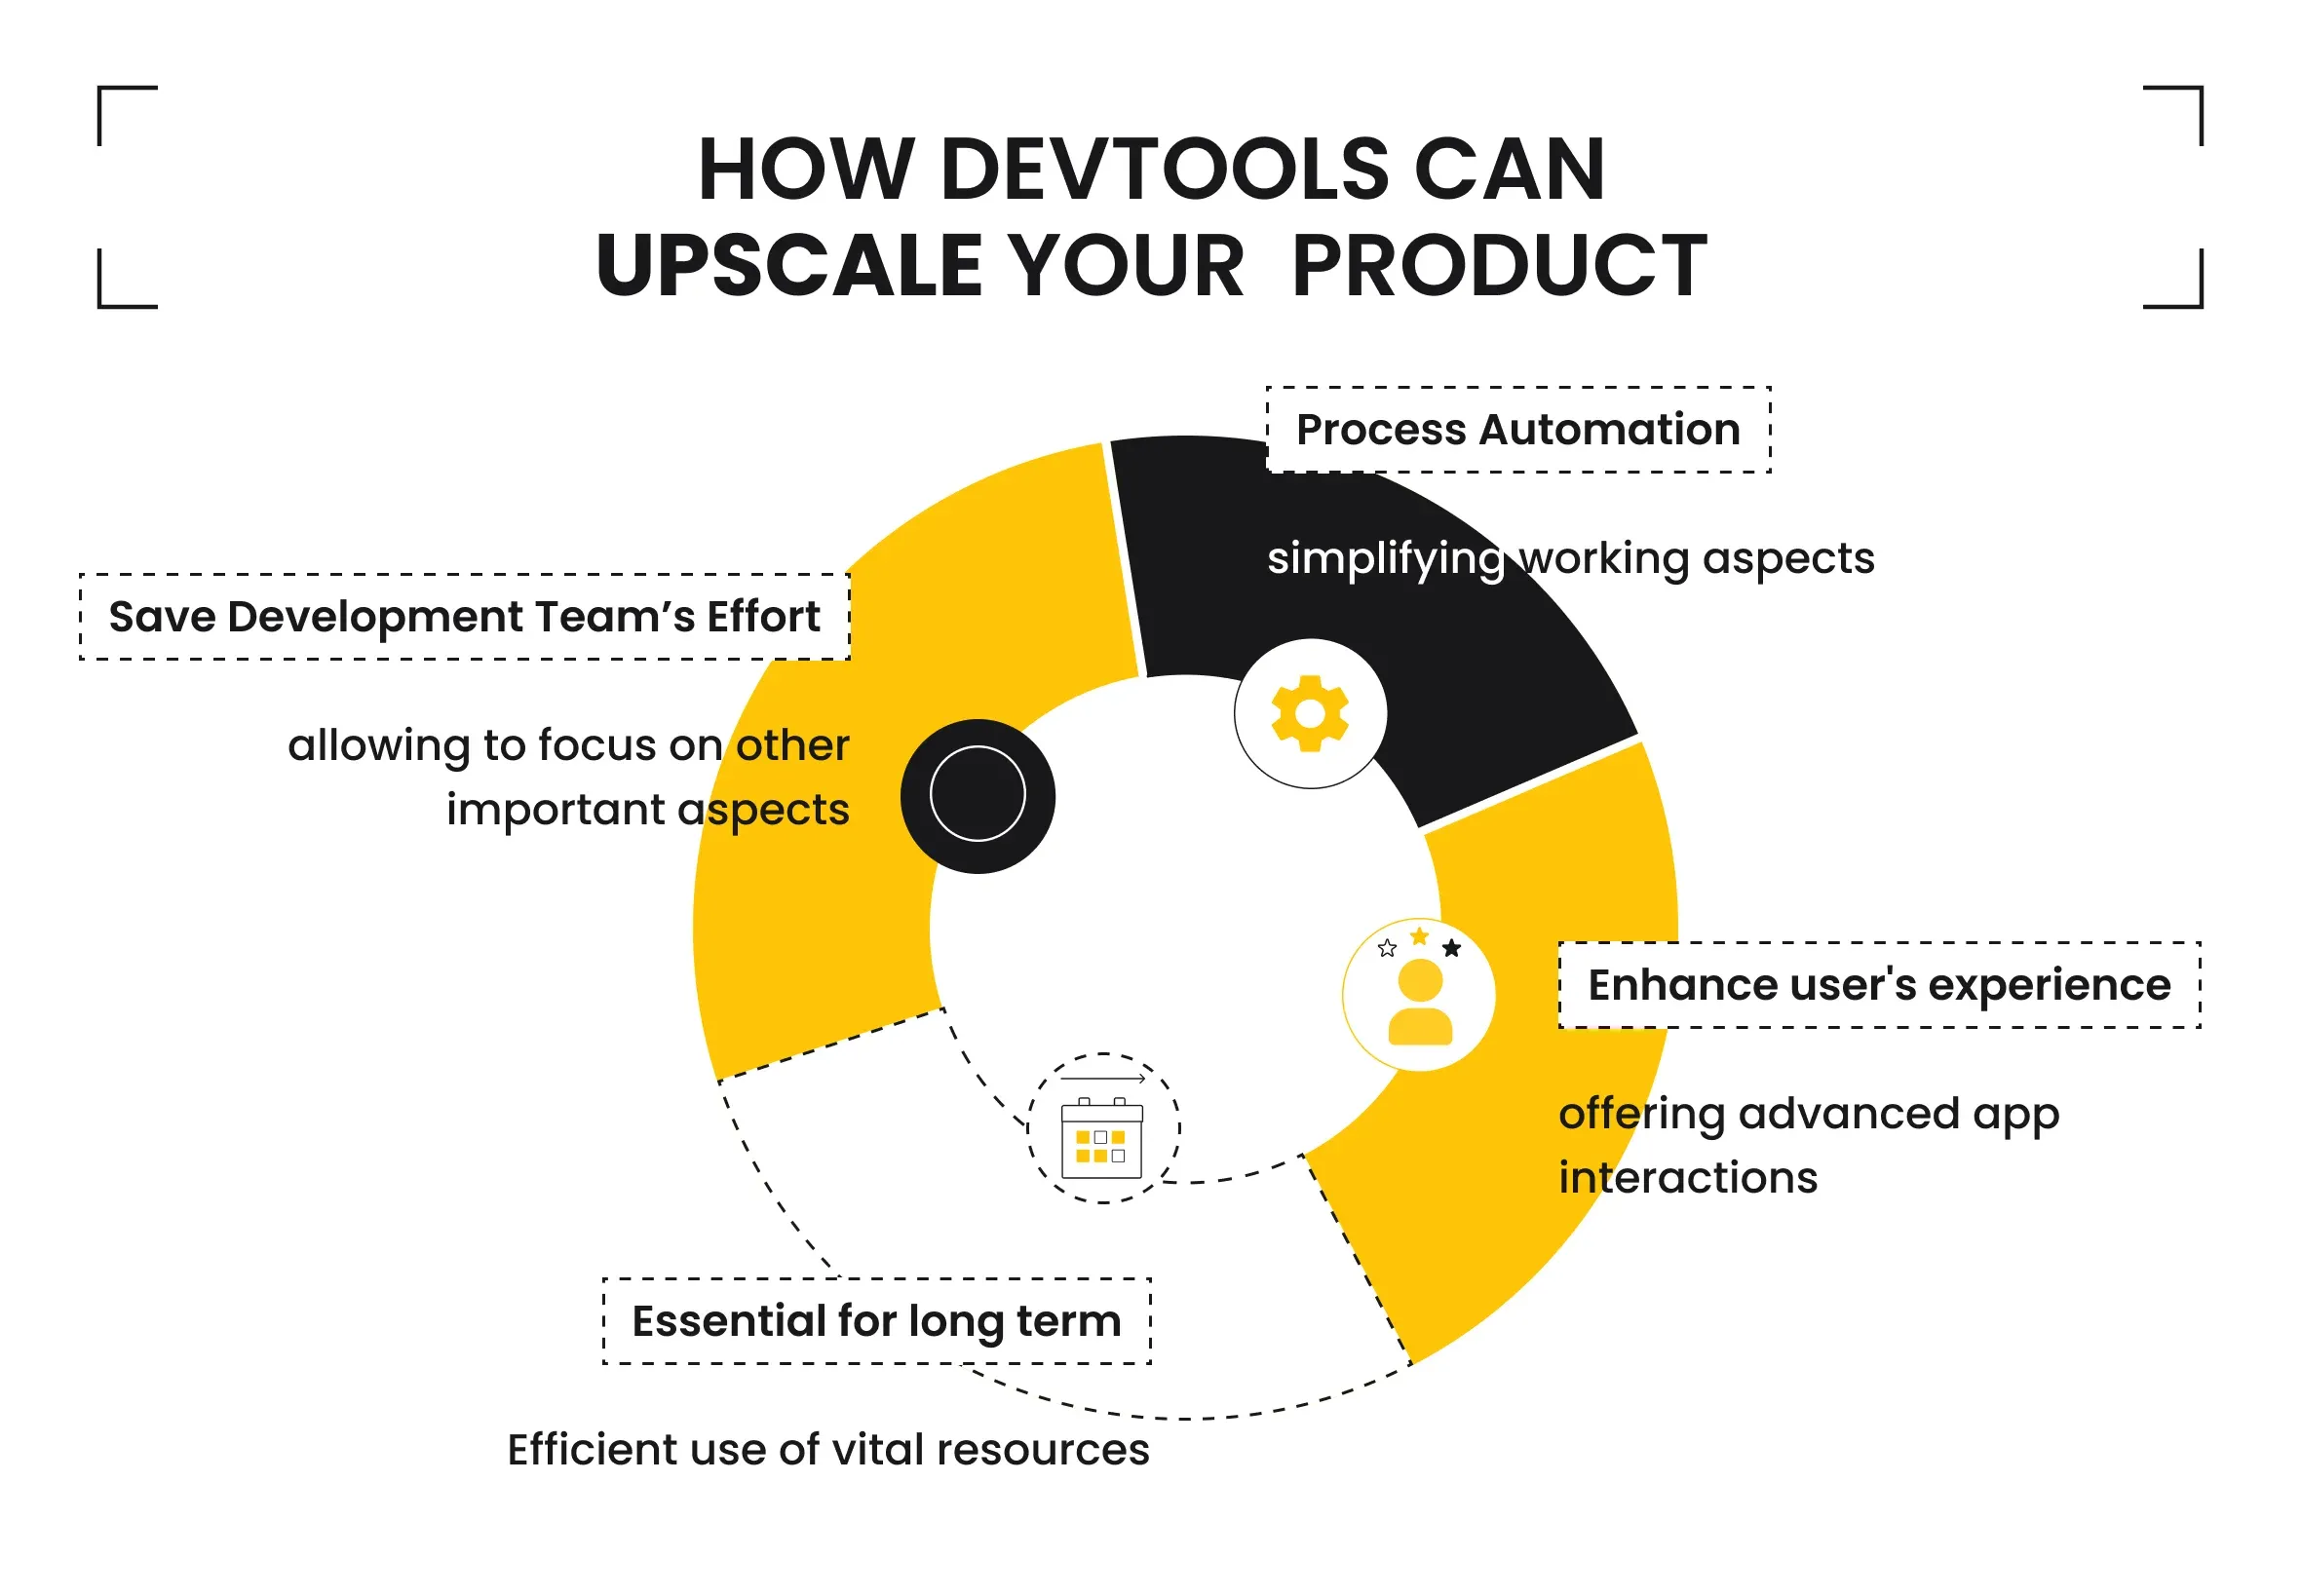 How Custom Development Tools Can Upscale Your Product?